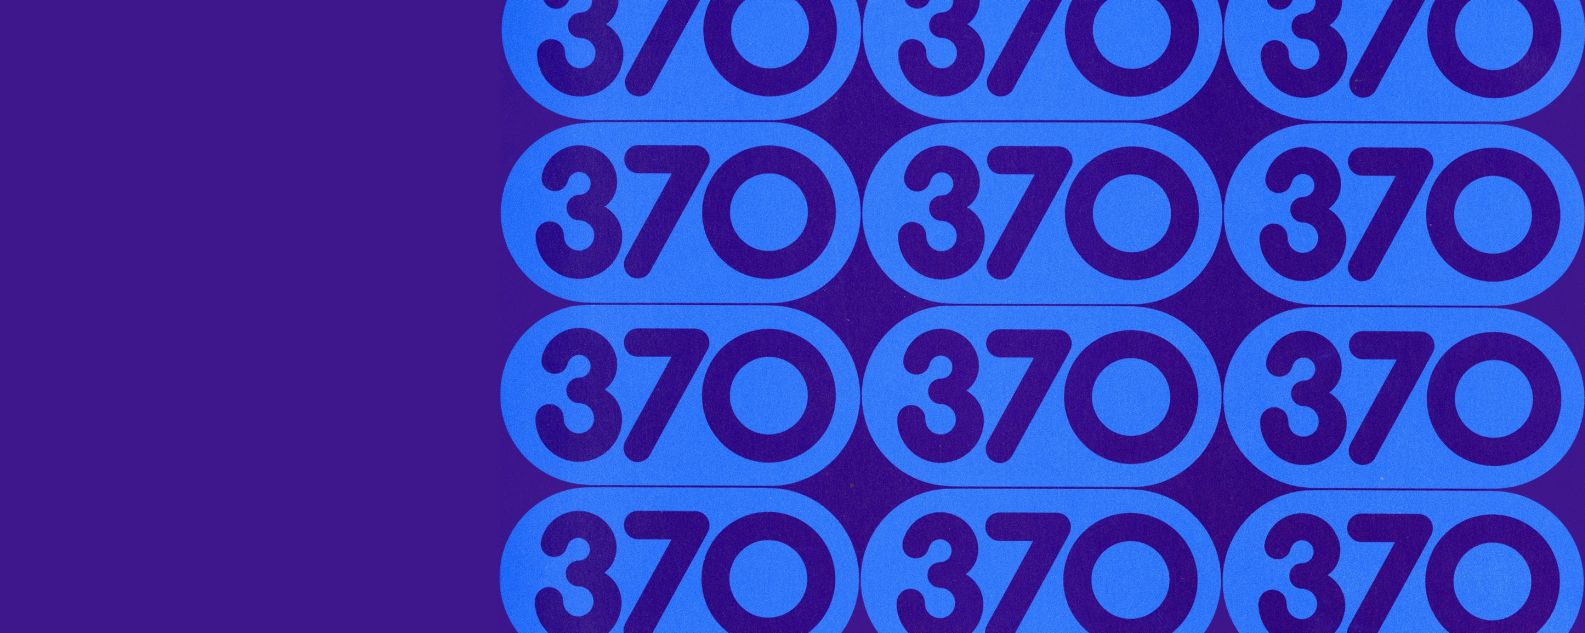 a blue background with the 370 number repeated all over it